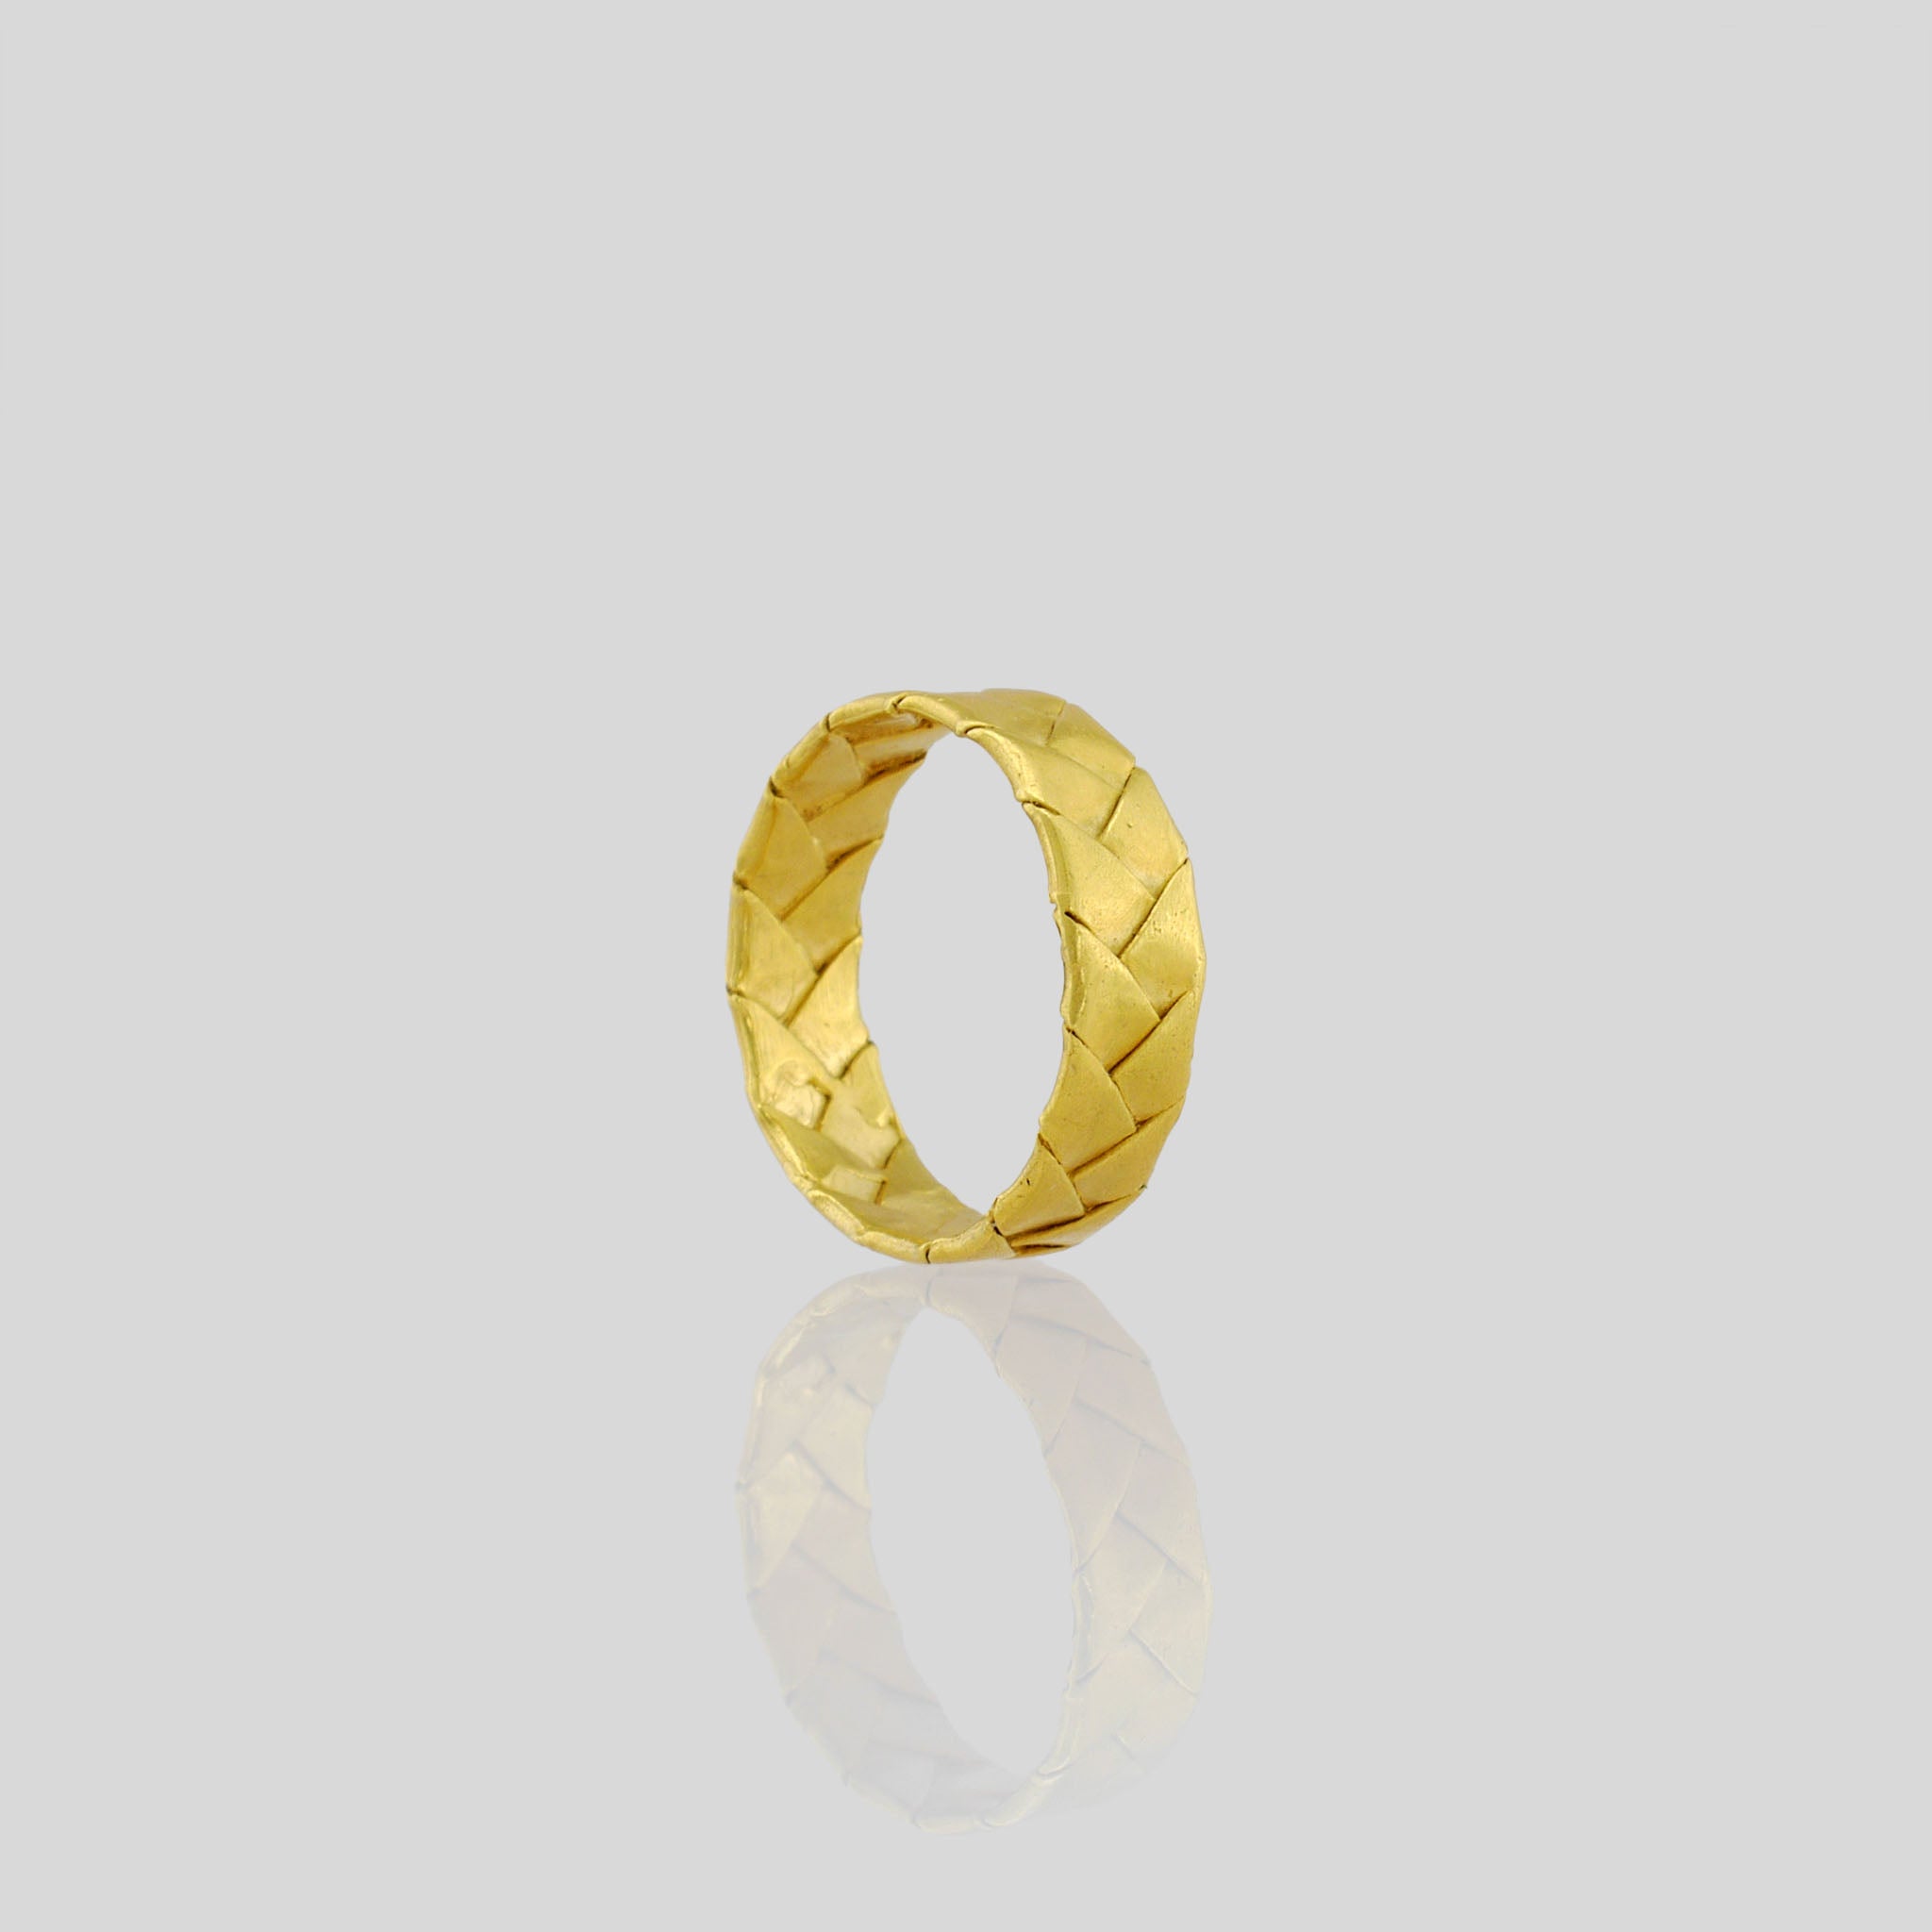 Classic Yellow Gold Braid Ring featuring intricately braided gold strands for a clean, precise, and beautiful appearance, ideal for everyday wear.